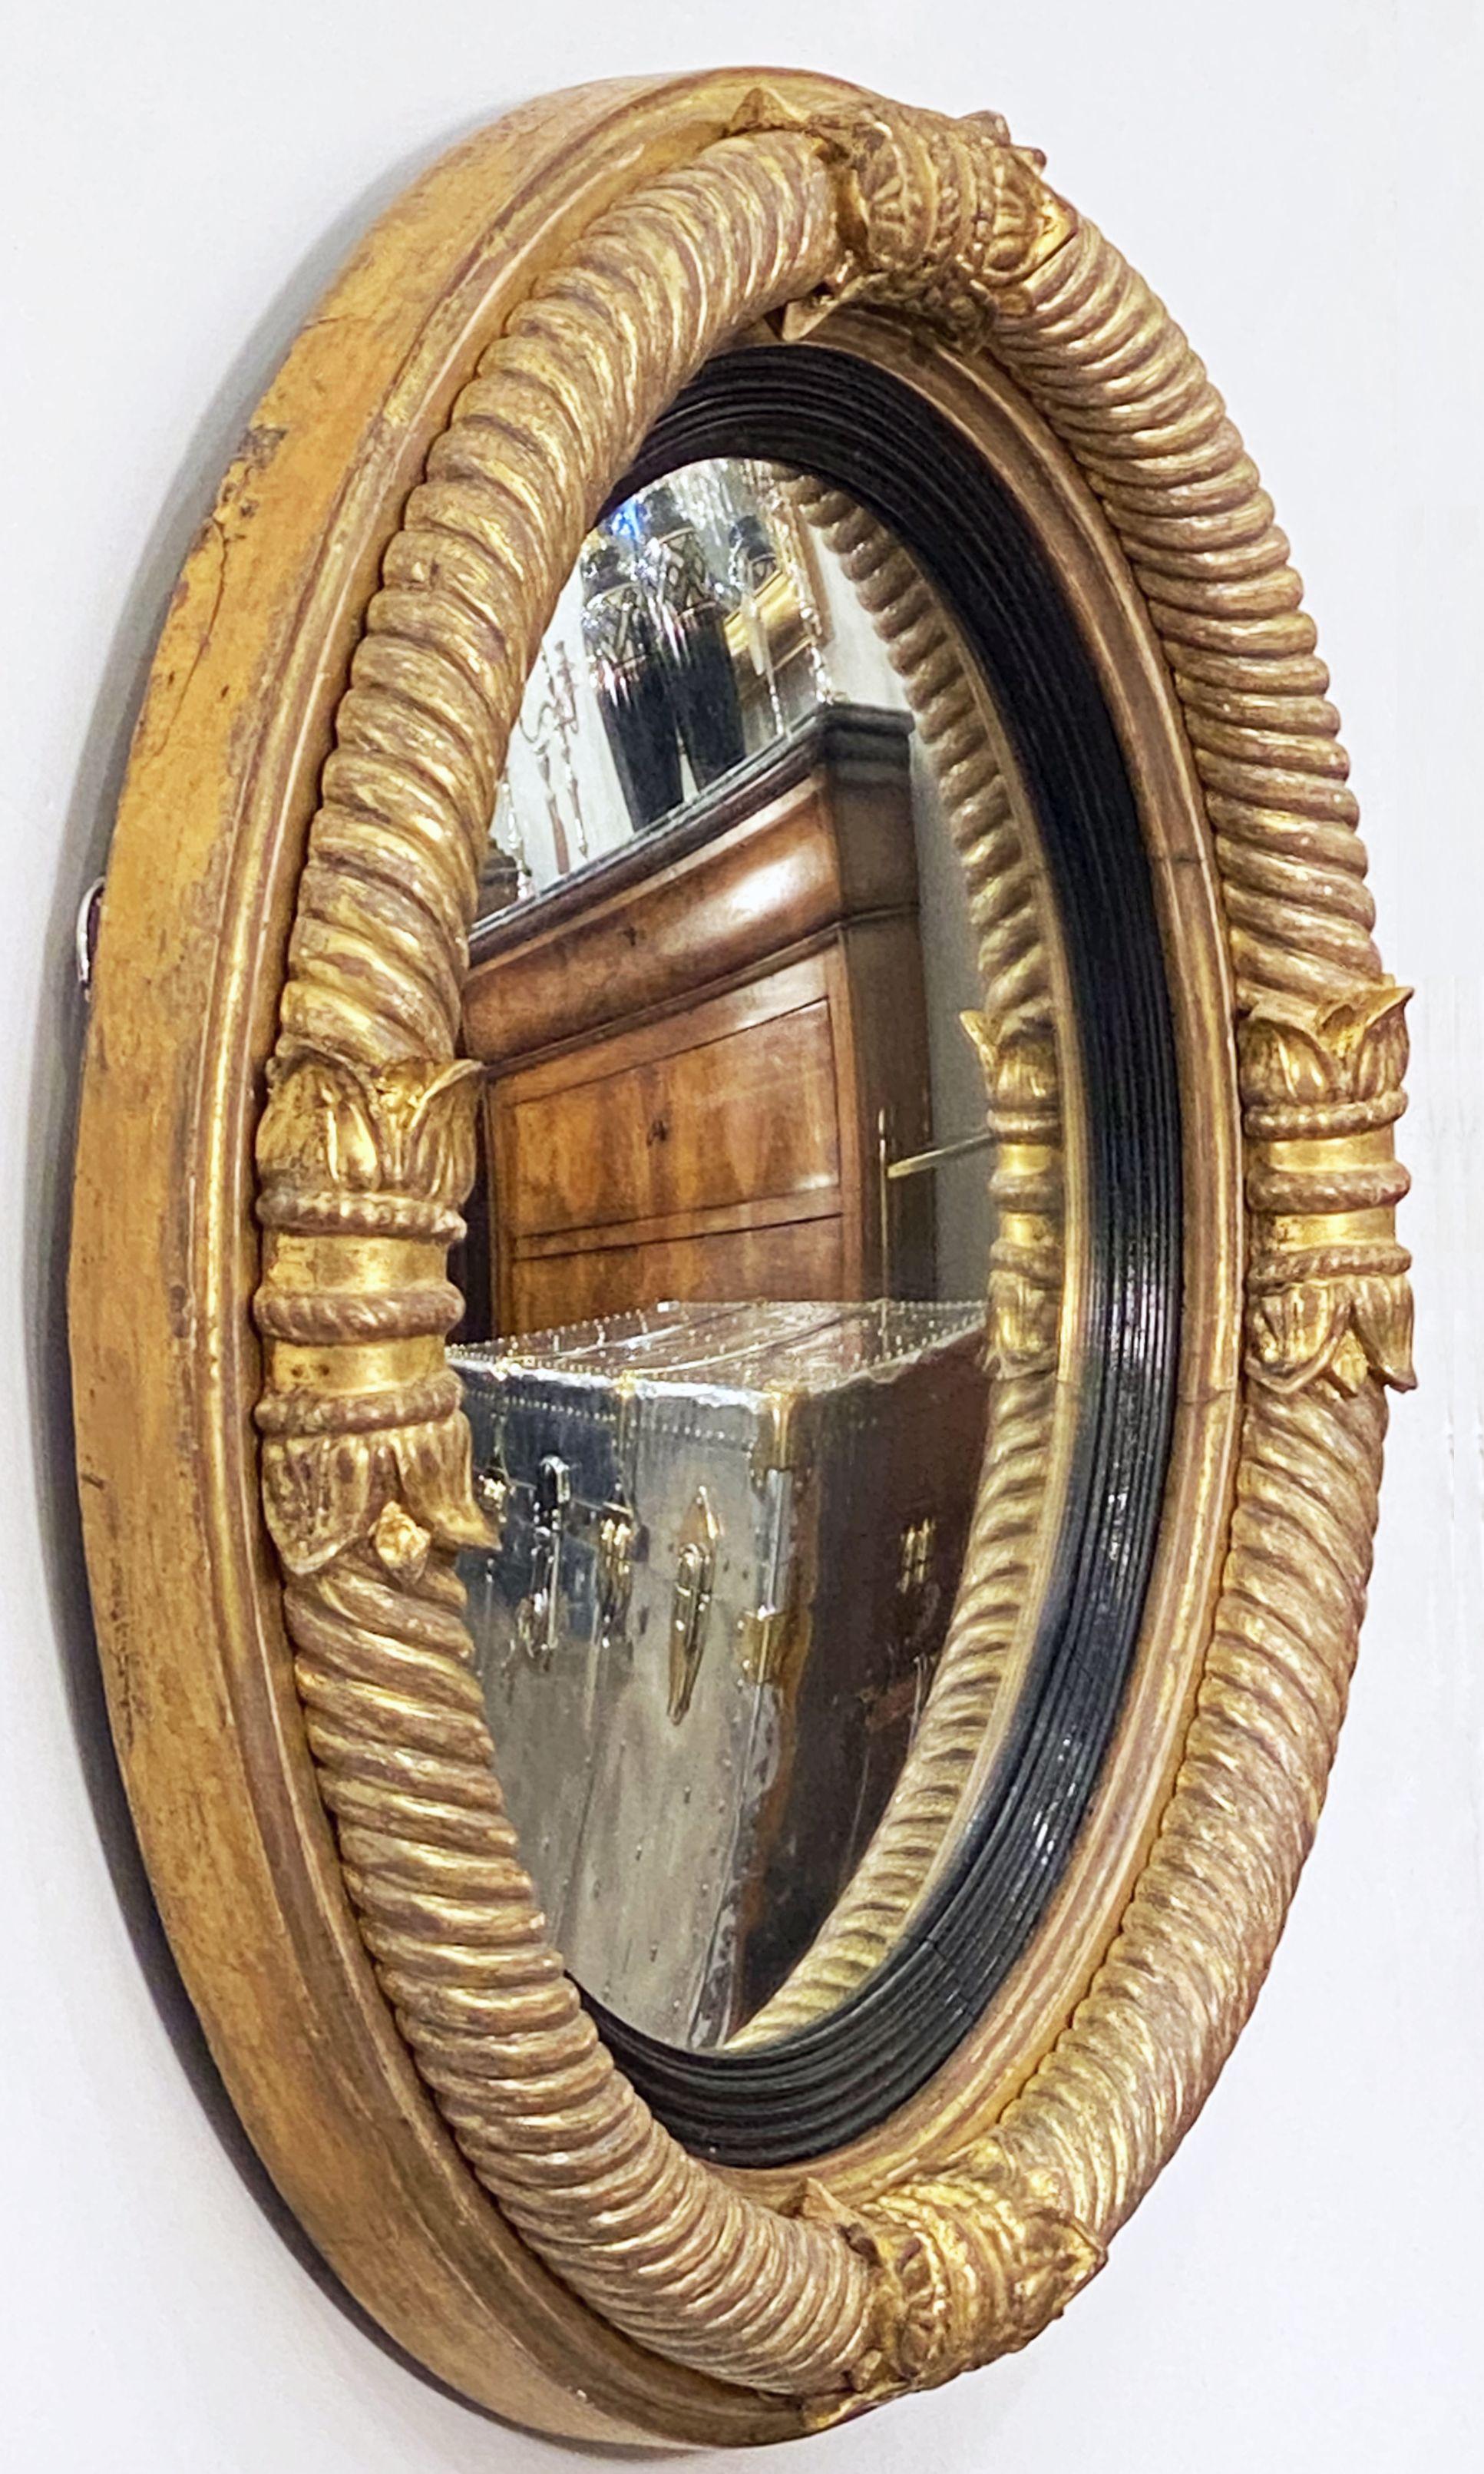 A fine period English convex mirror from the Regency era featuring a design of bowed Classical columns around a ribbed outer circumference with traces of the original period gilding, and an ebonized, reeded inner ring. 

The outer frame having an